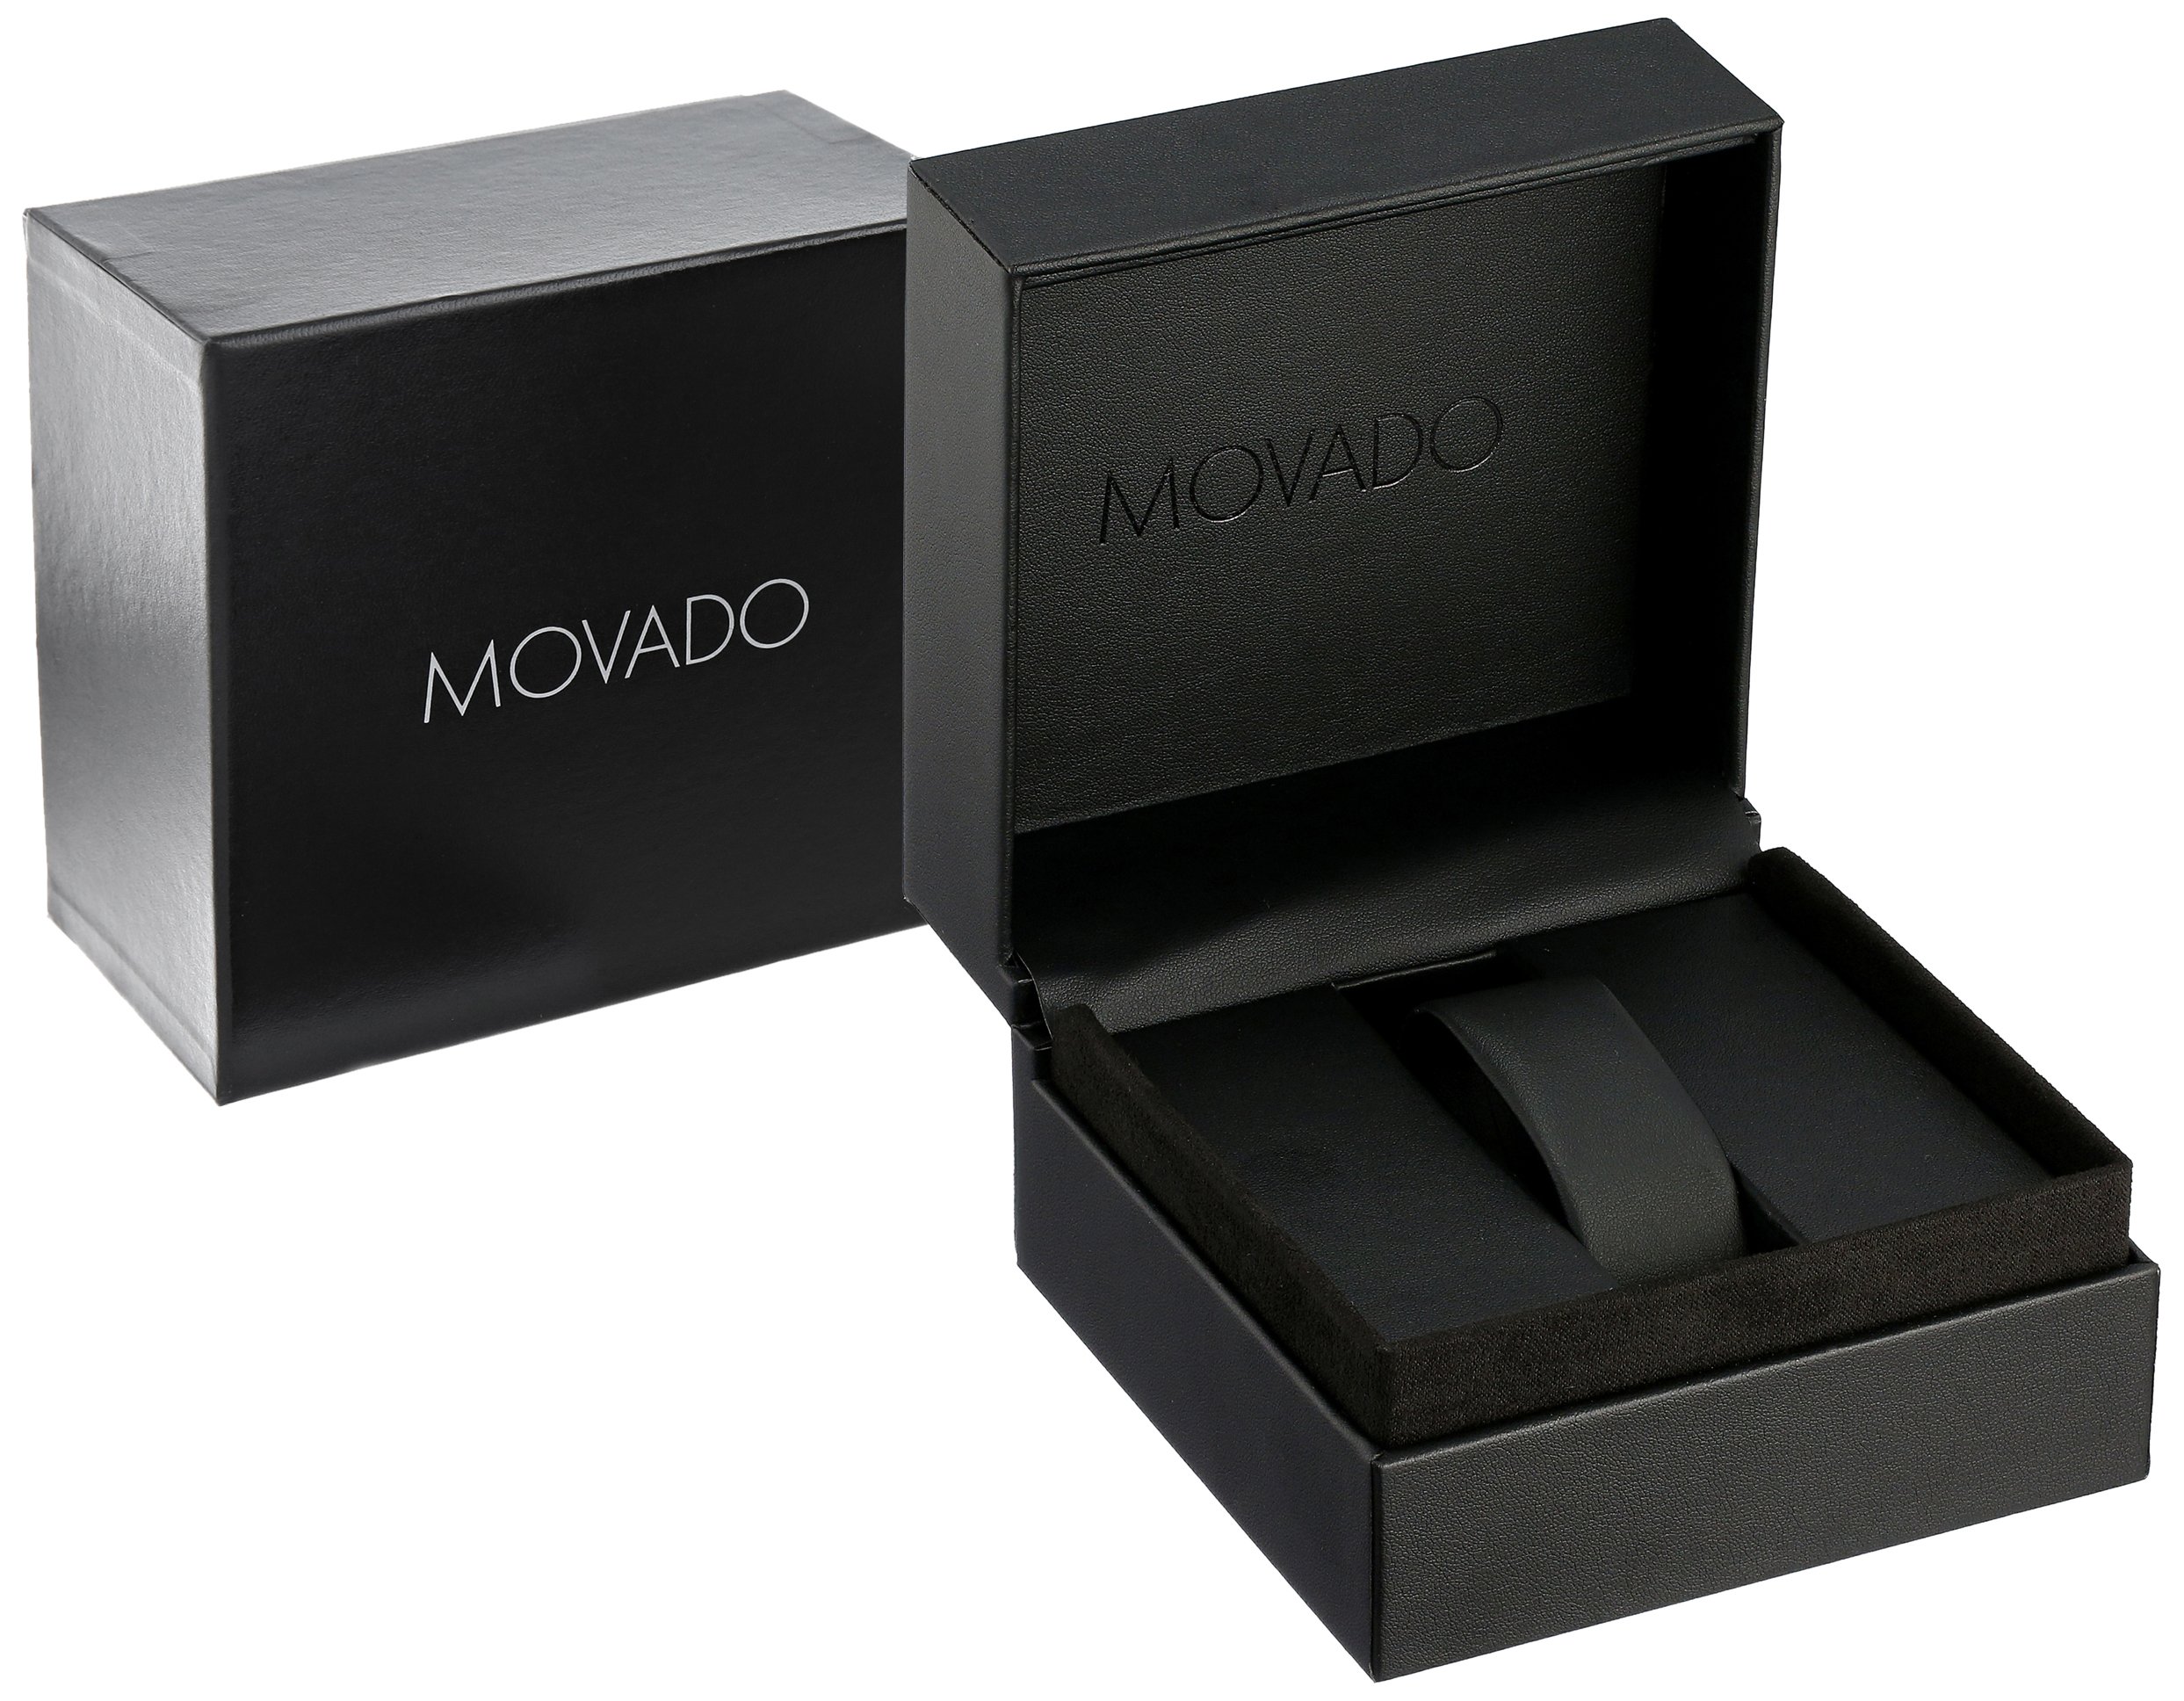 Movado Men's Swiss Quartz Stainless Steel Watch, Color: Silver-Toned (Model: 0607041)